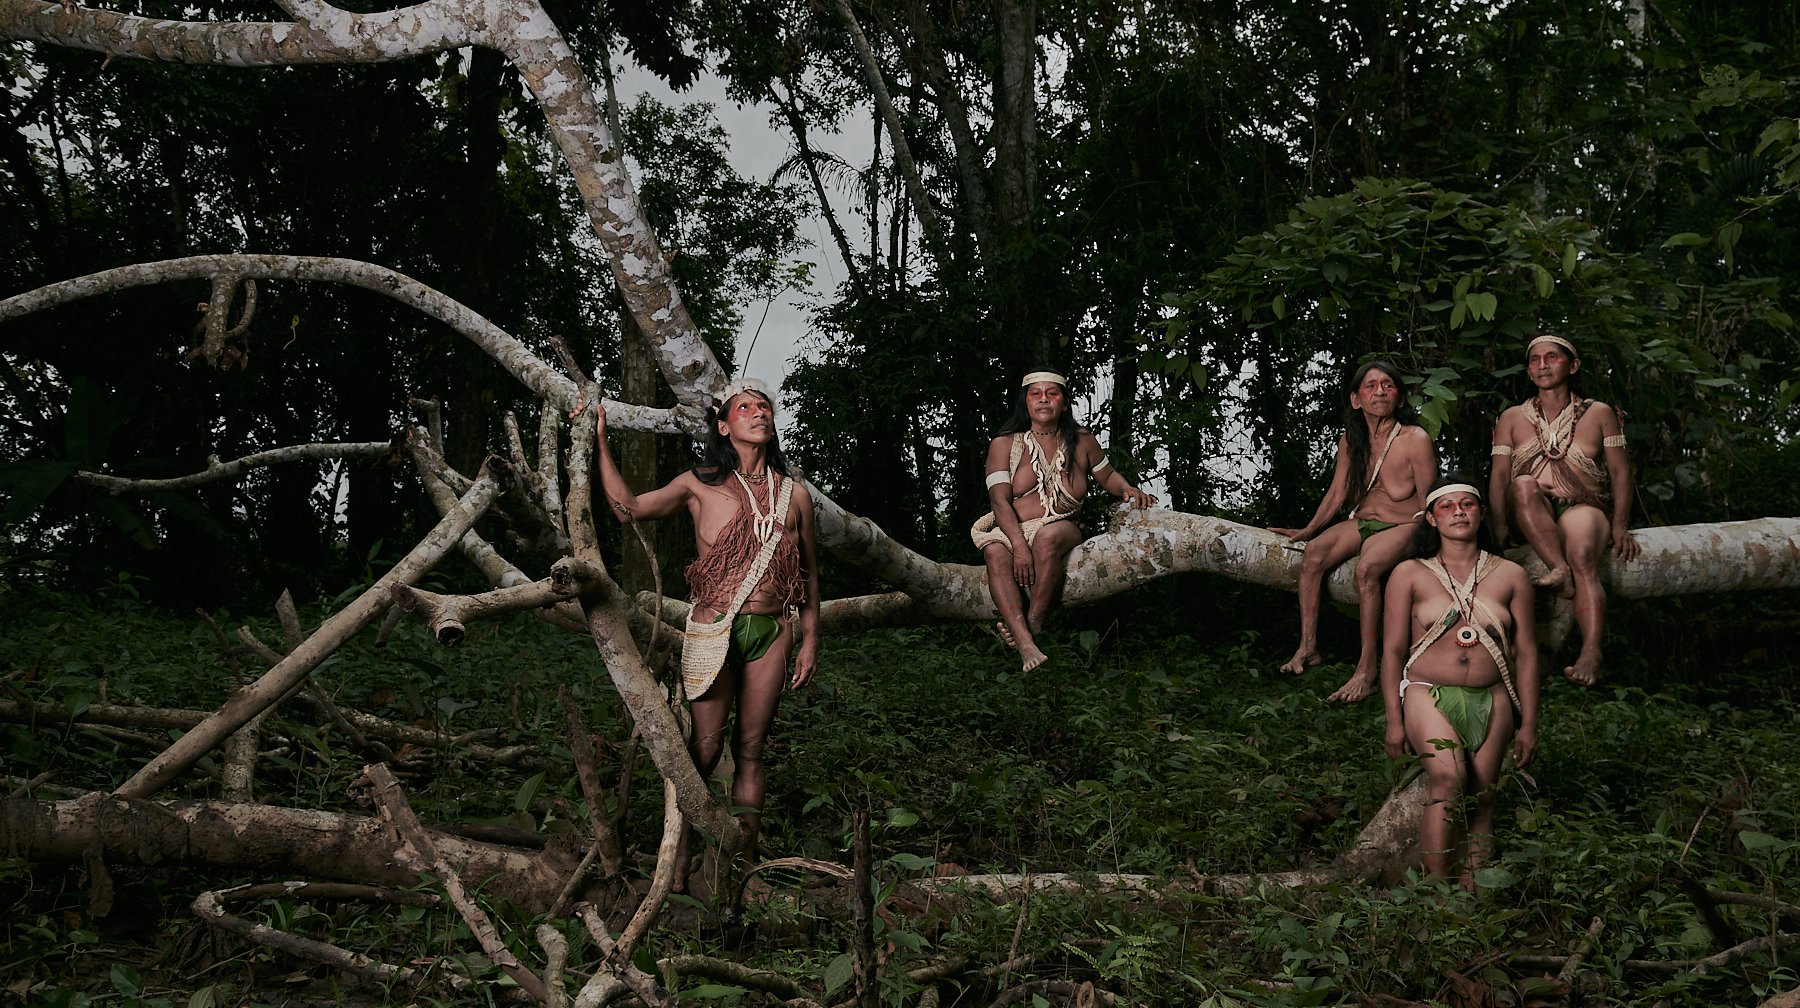 The women of the Huaorani after their annual tribal celebration